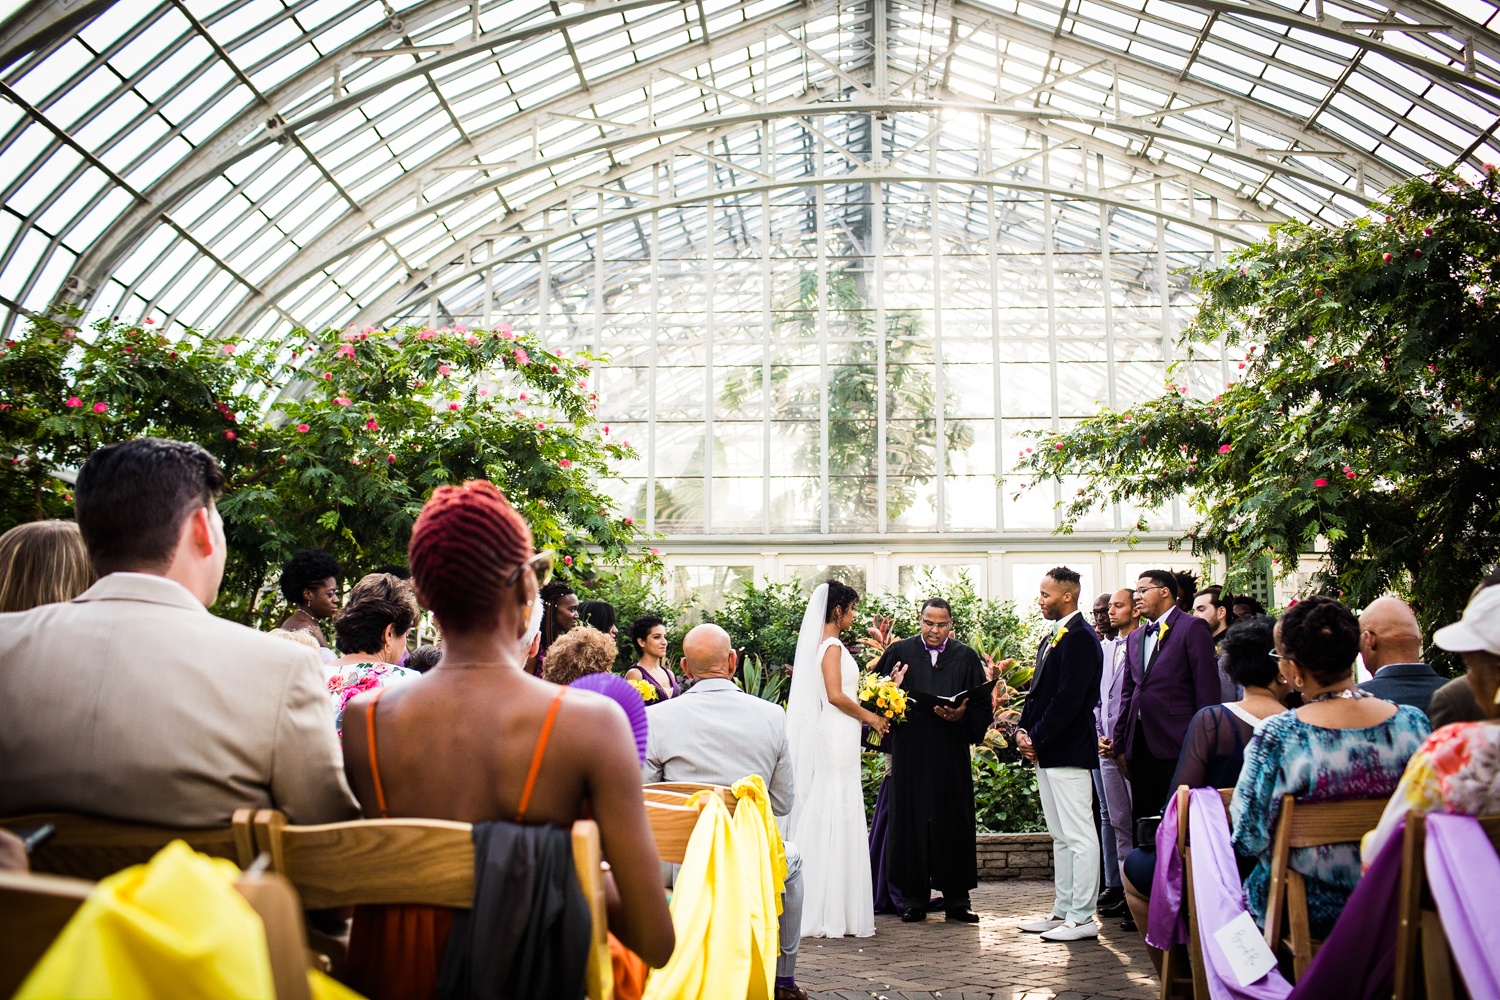 A view of a wedding ceremony during a Garfield Park Conservatory wedding.